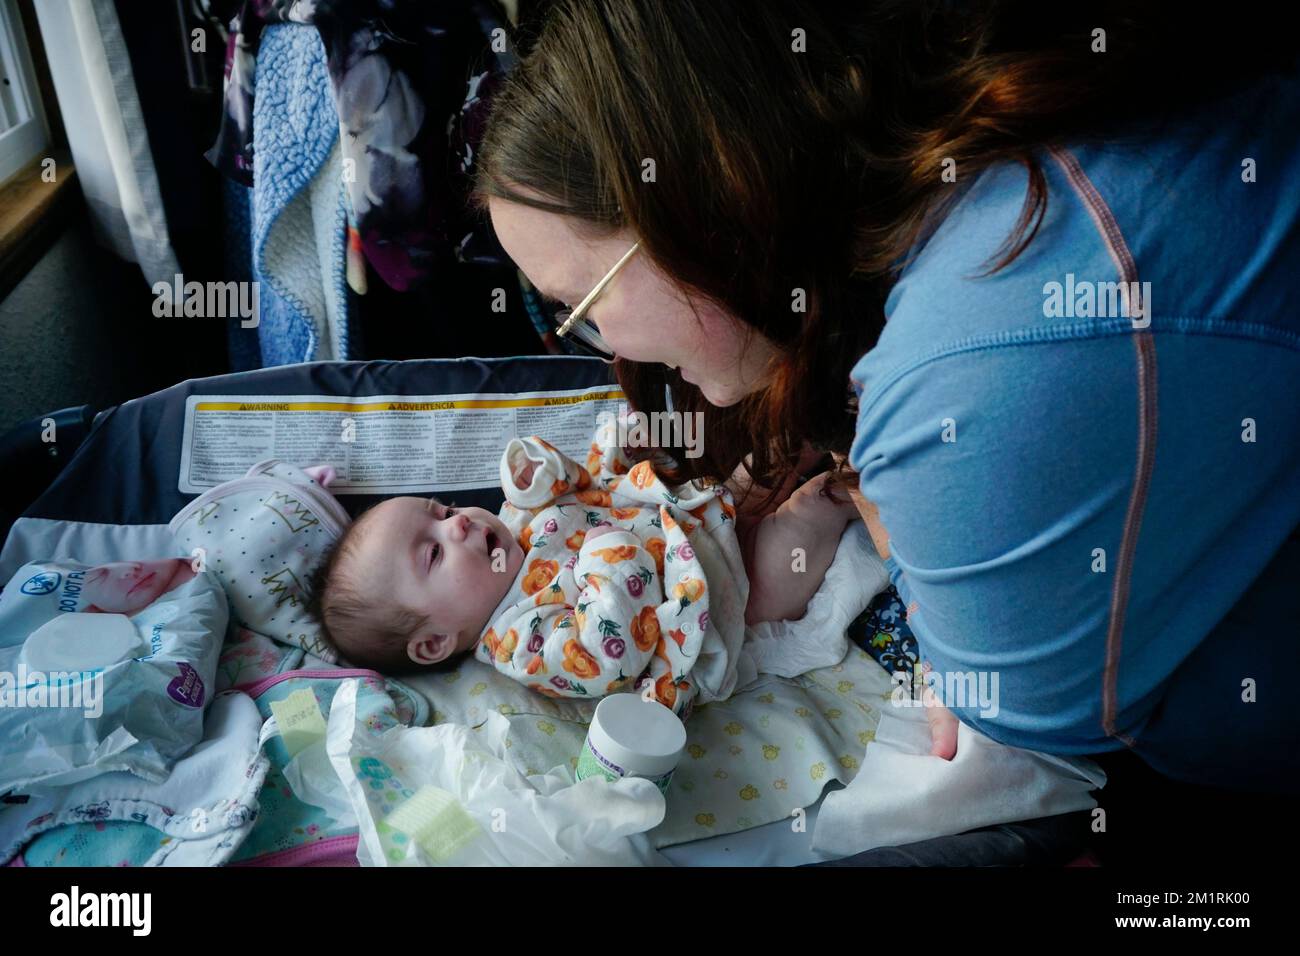 Young mother with new baby 2 months old. Stock Photo